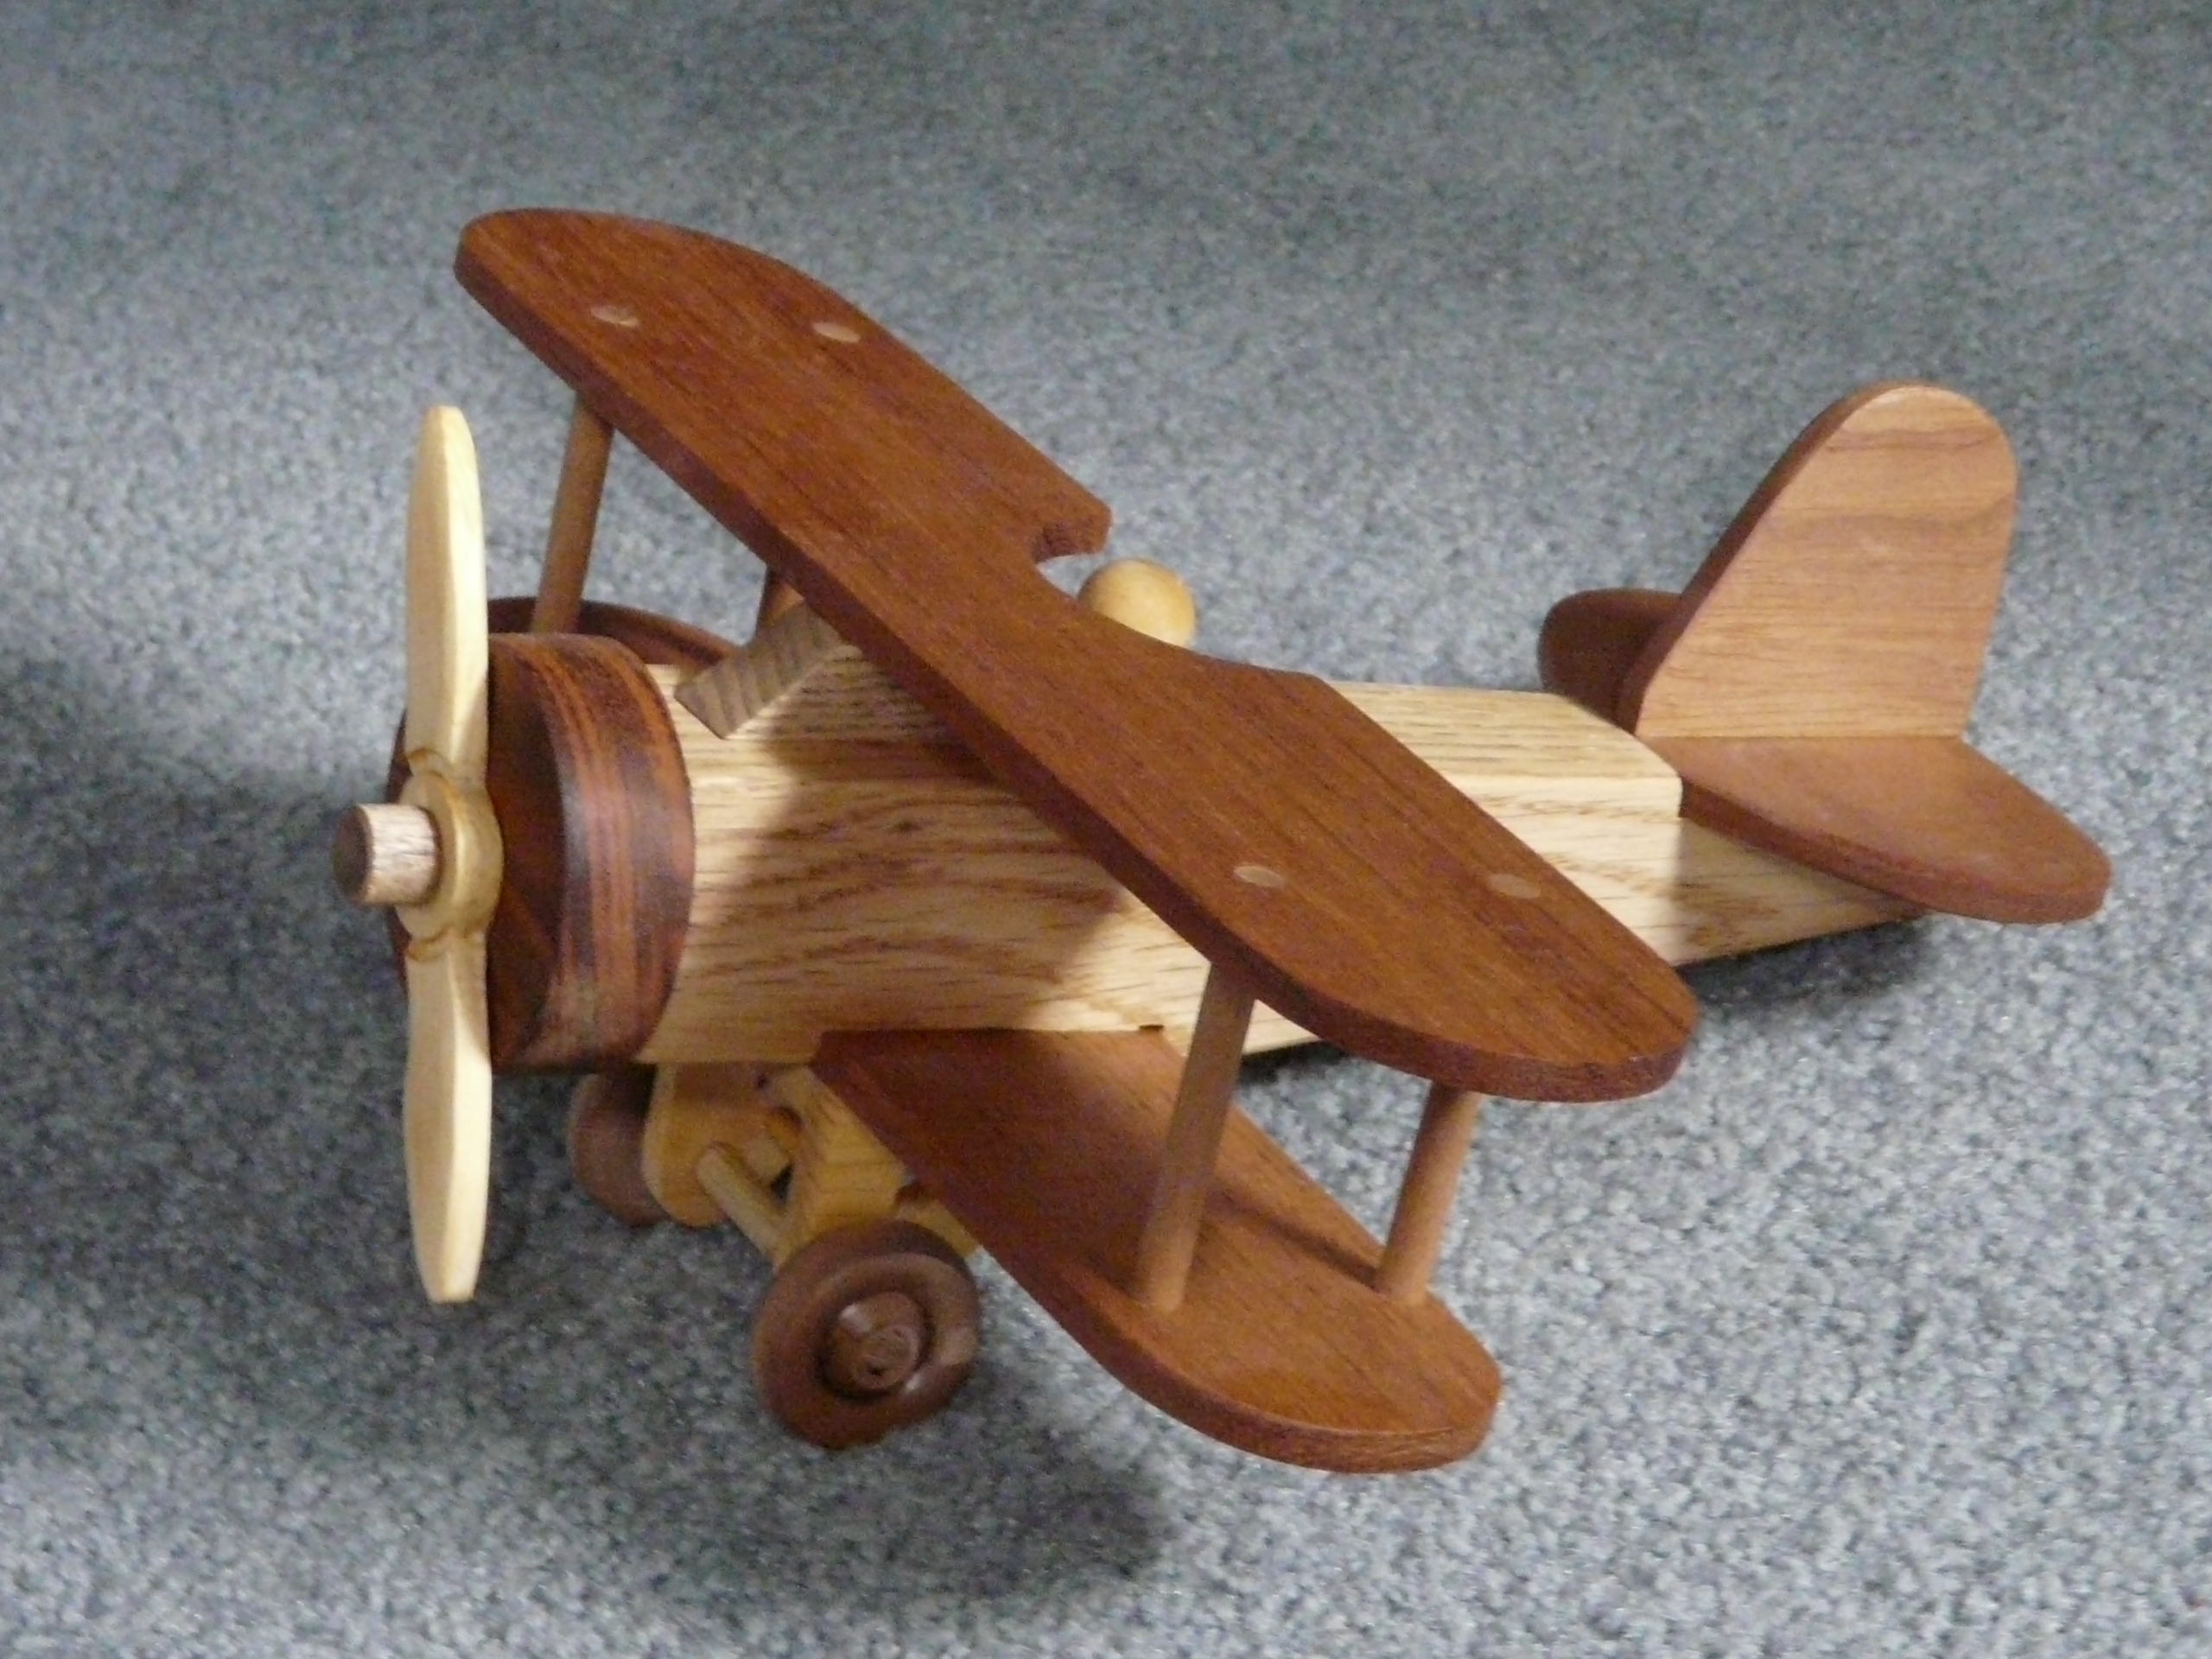 posted in wooden toys tagged handmade toys pull toys toy airplane toy 